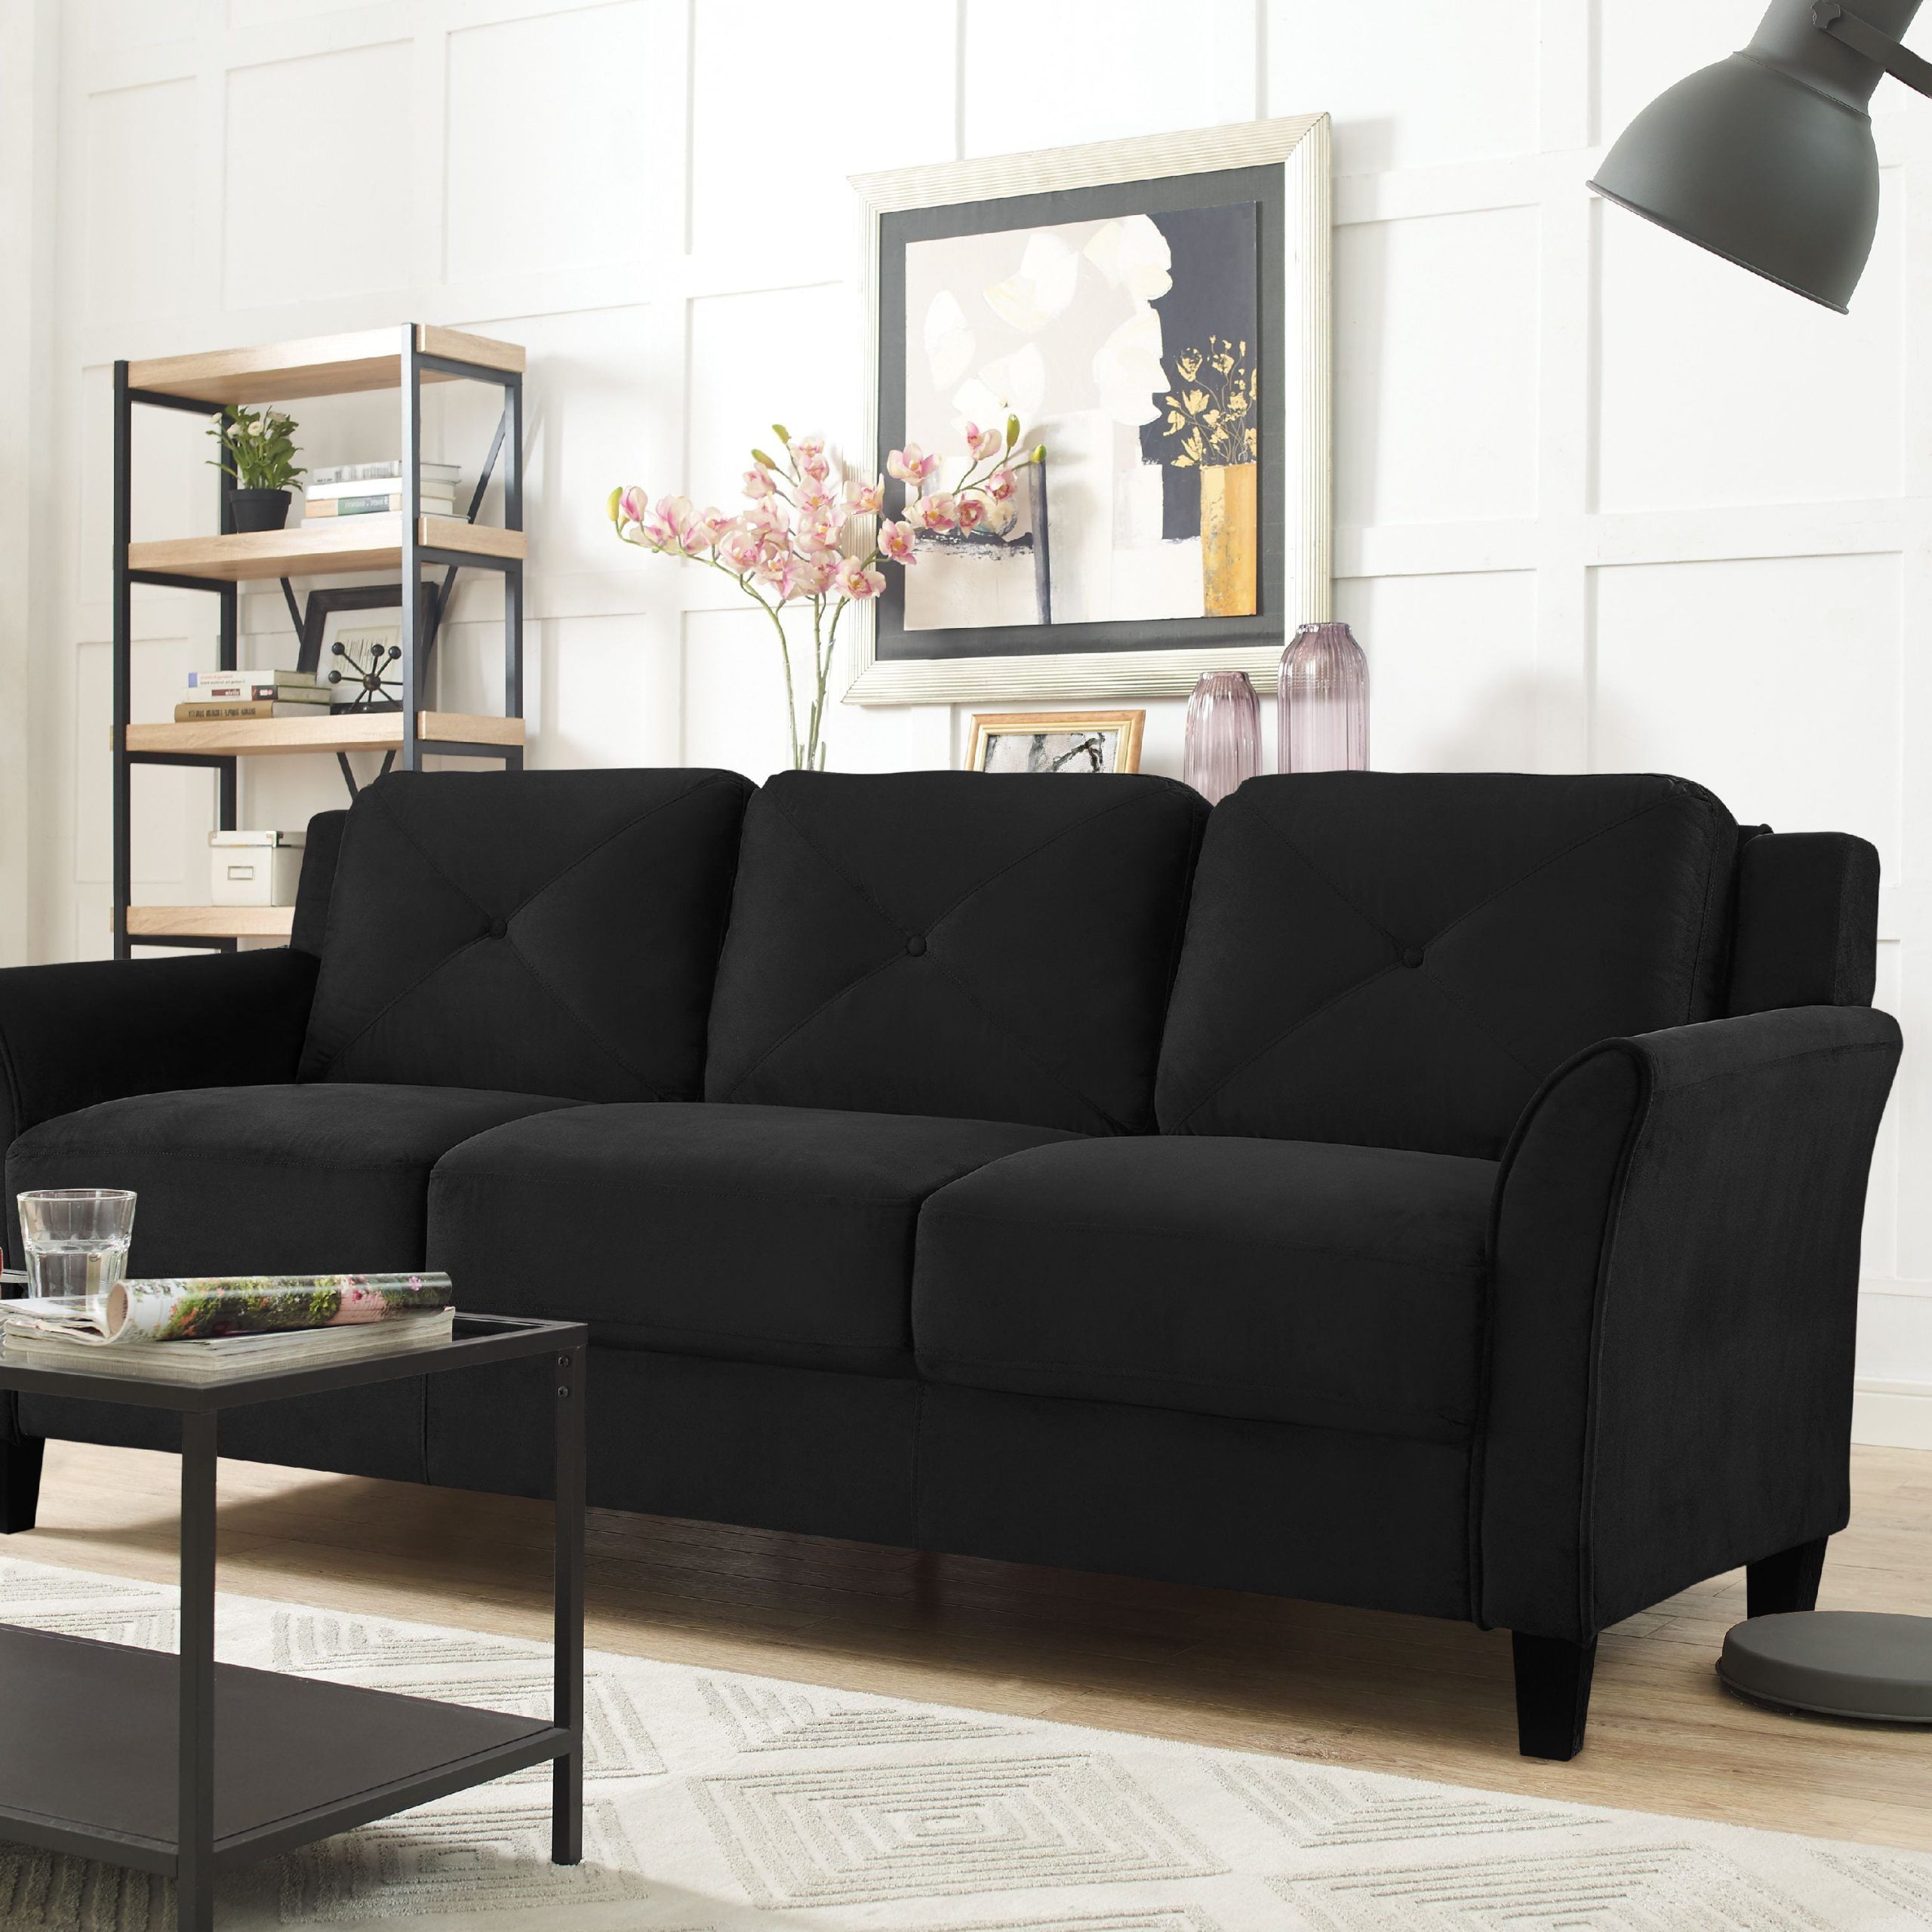 Lifestyle Solutions Taryn Curved Arm Fabric Sofa, Black – Walmart Pertaining To Recent Right Facing Black Sofas (View 15 of 15)